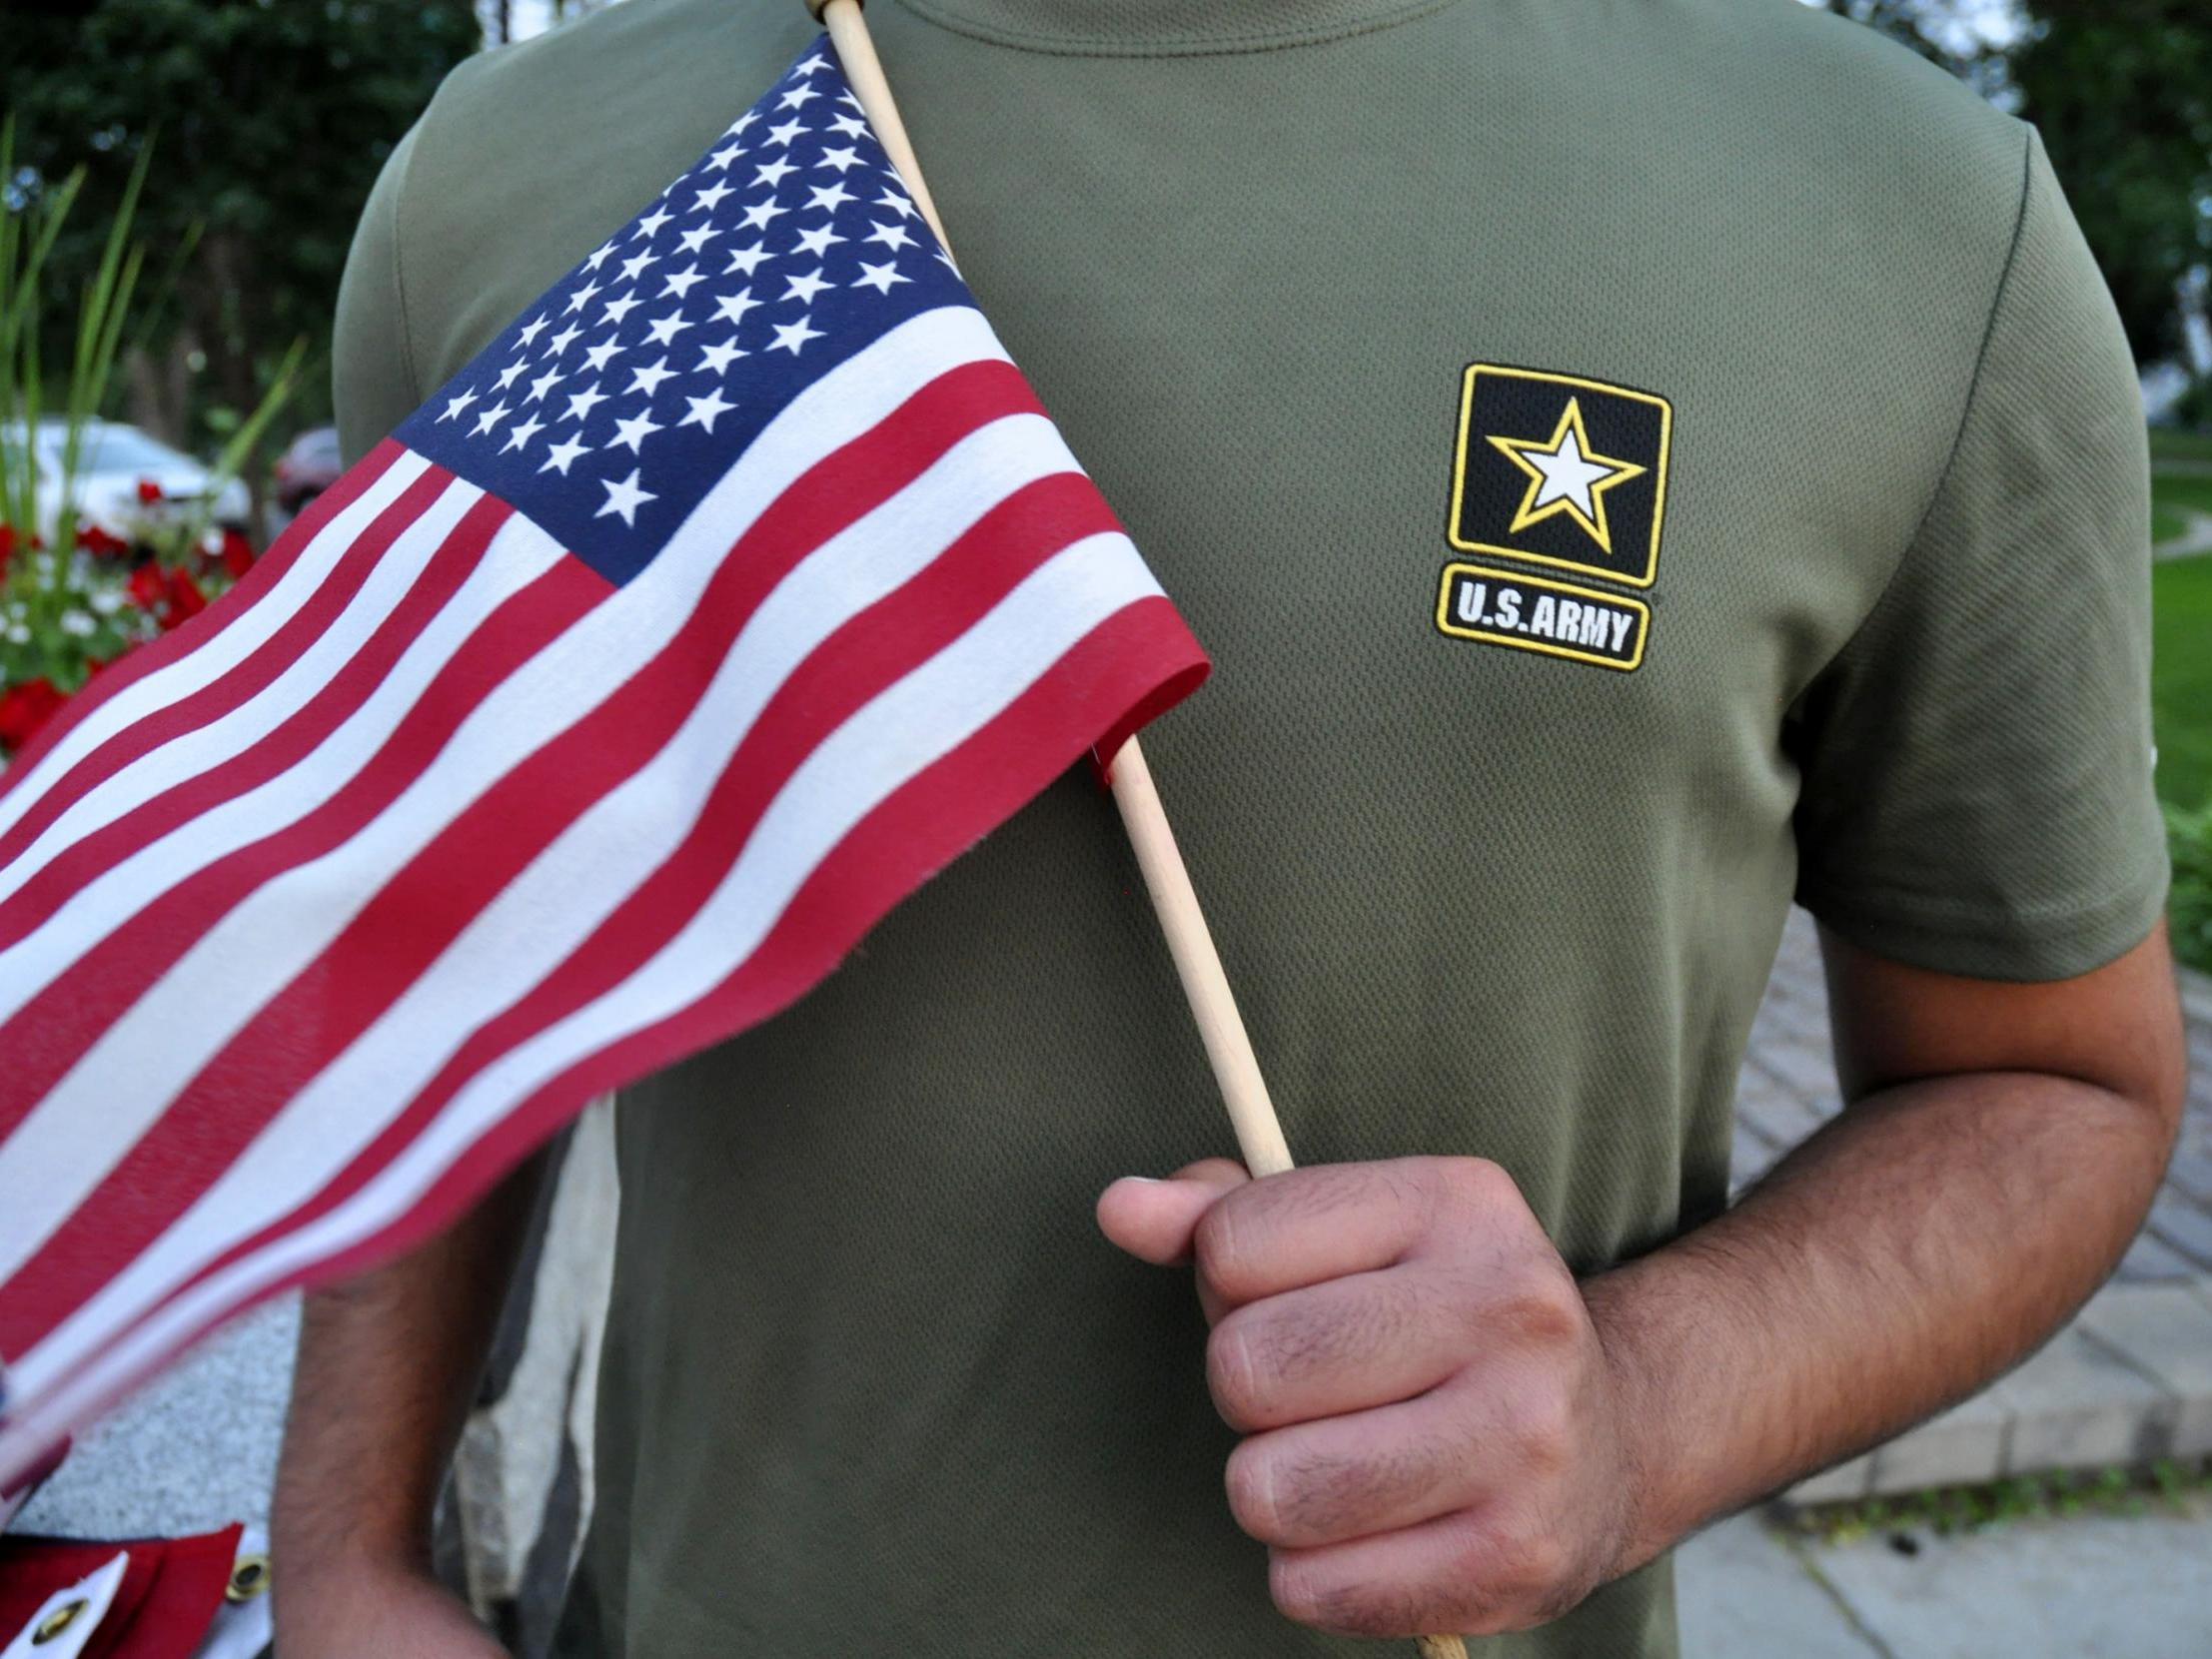 A Pakistani recruit, recently discharged by the US Army, holds an American flag